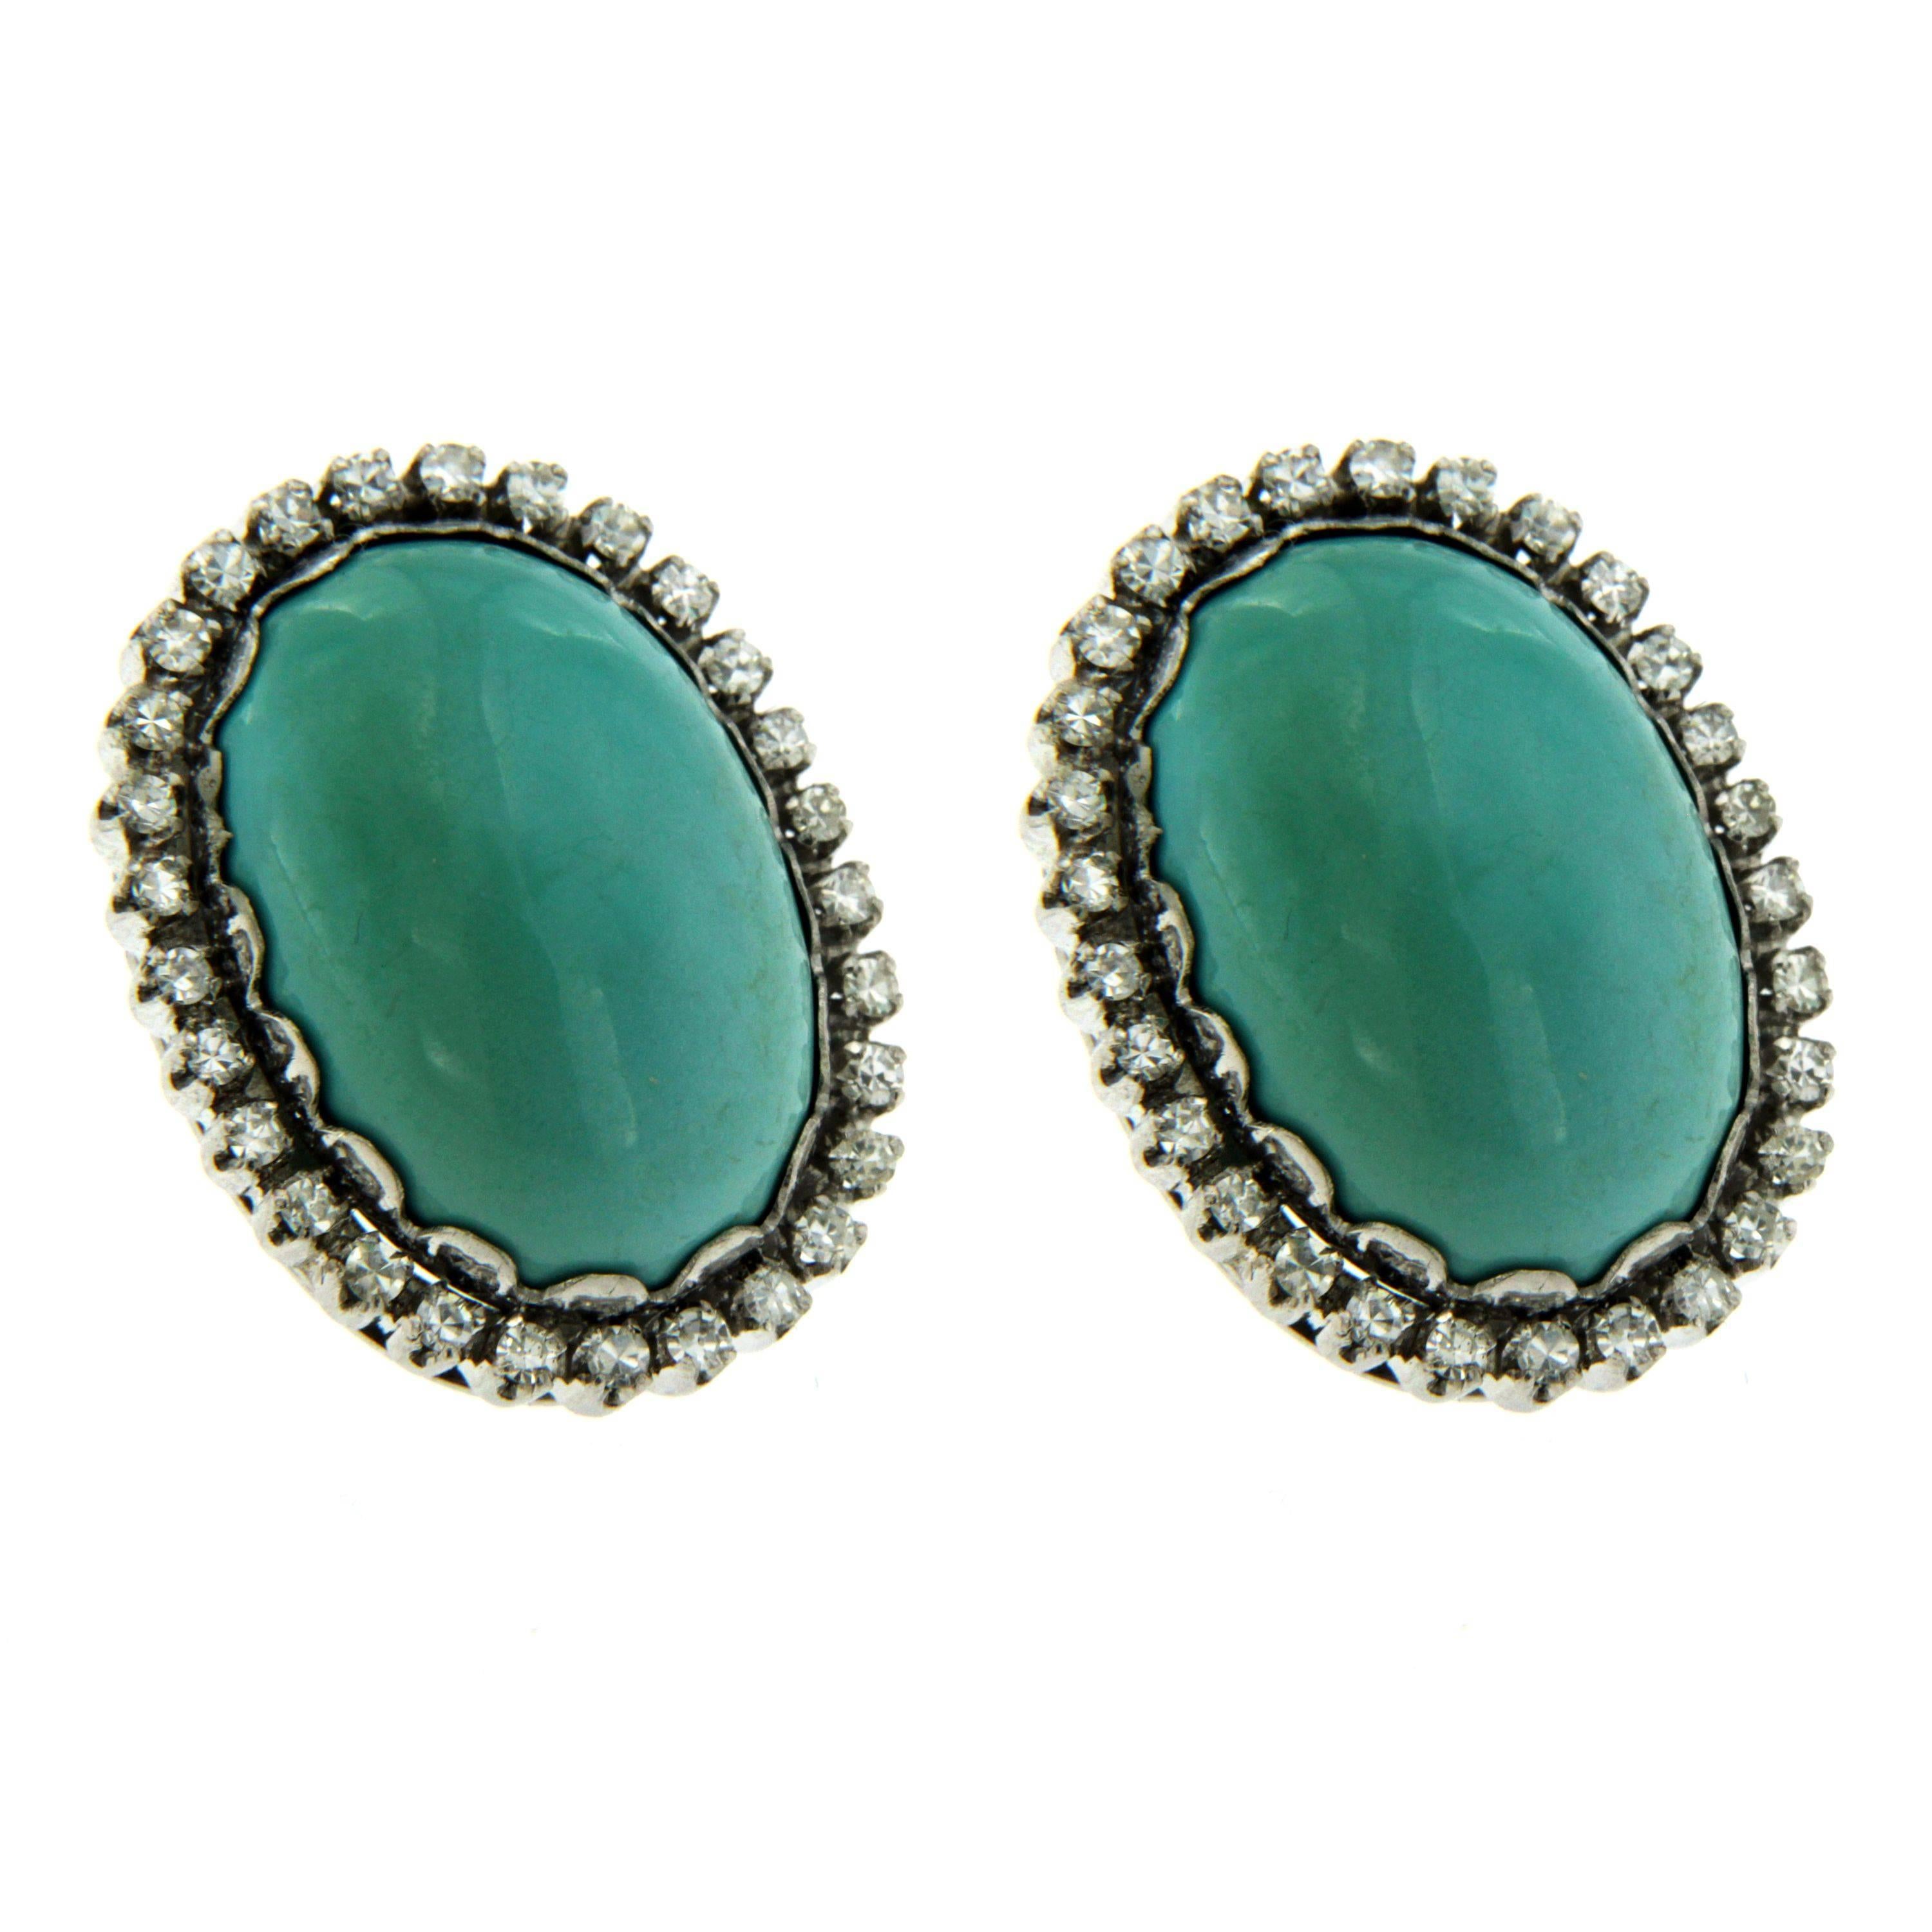 18k gold earings, decorated with natural oval Turquoise, surrounded with approximately 1.50ct in G/VS round cut diamonds. Circa 1960

CONDITION: Pre-owned - Excellent 
METAL: 18k Gold 
STONE: Diamond 1.50 total carats - Turquoise
MEASURES: height